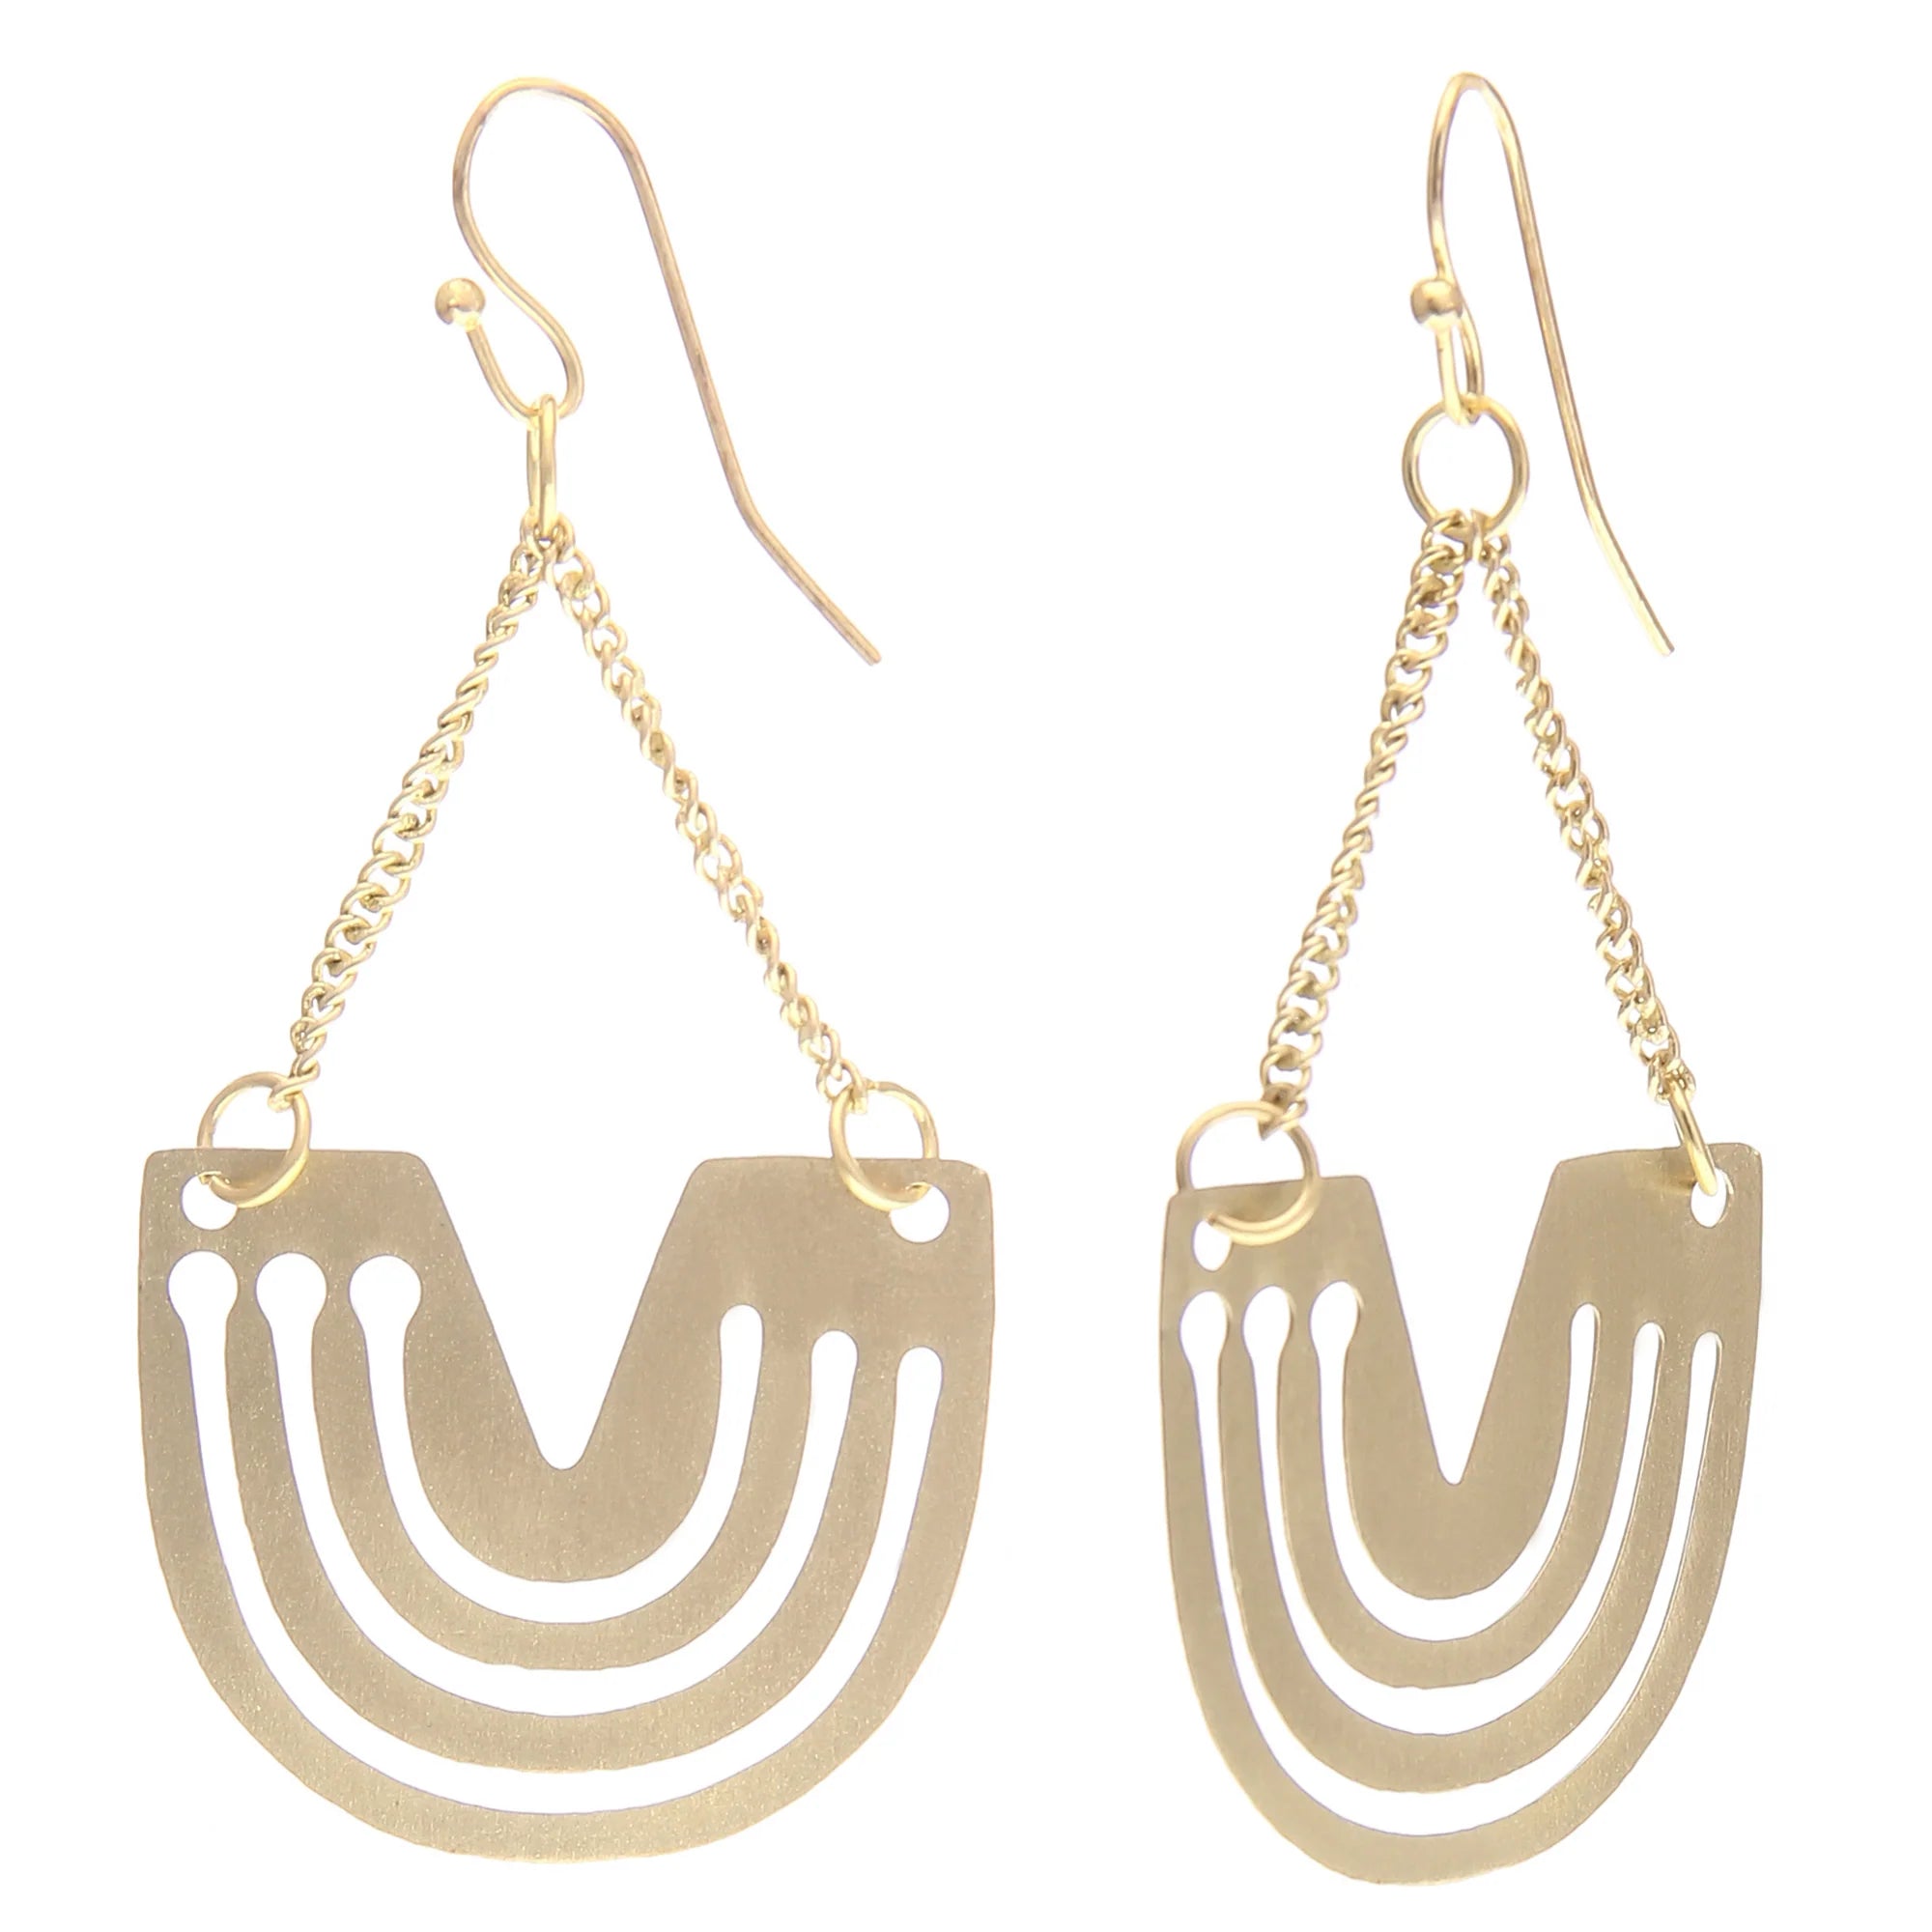 Gold earrings with hook attachment, chain and horse shoe design.